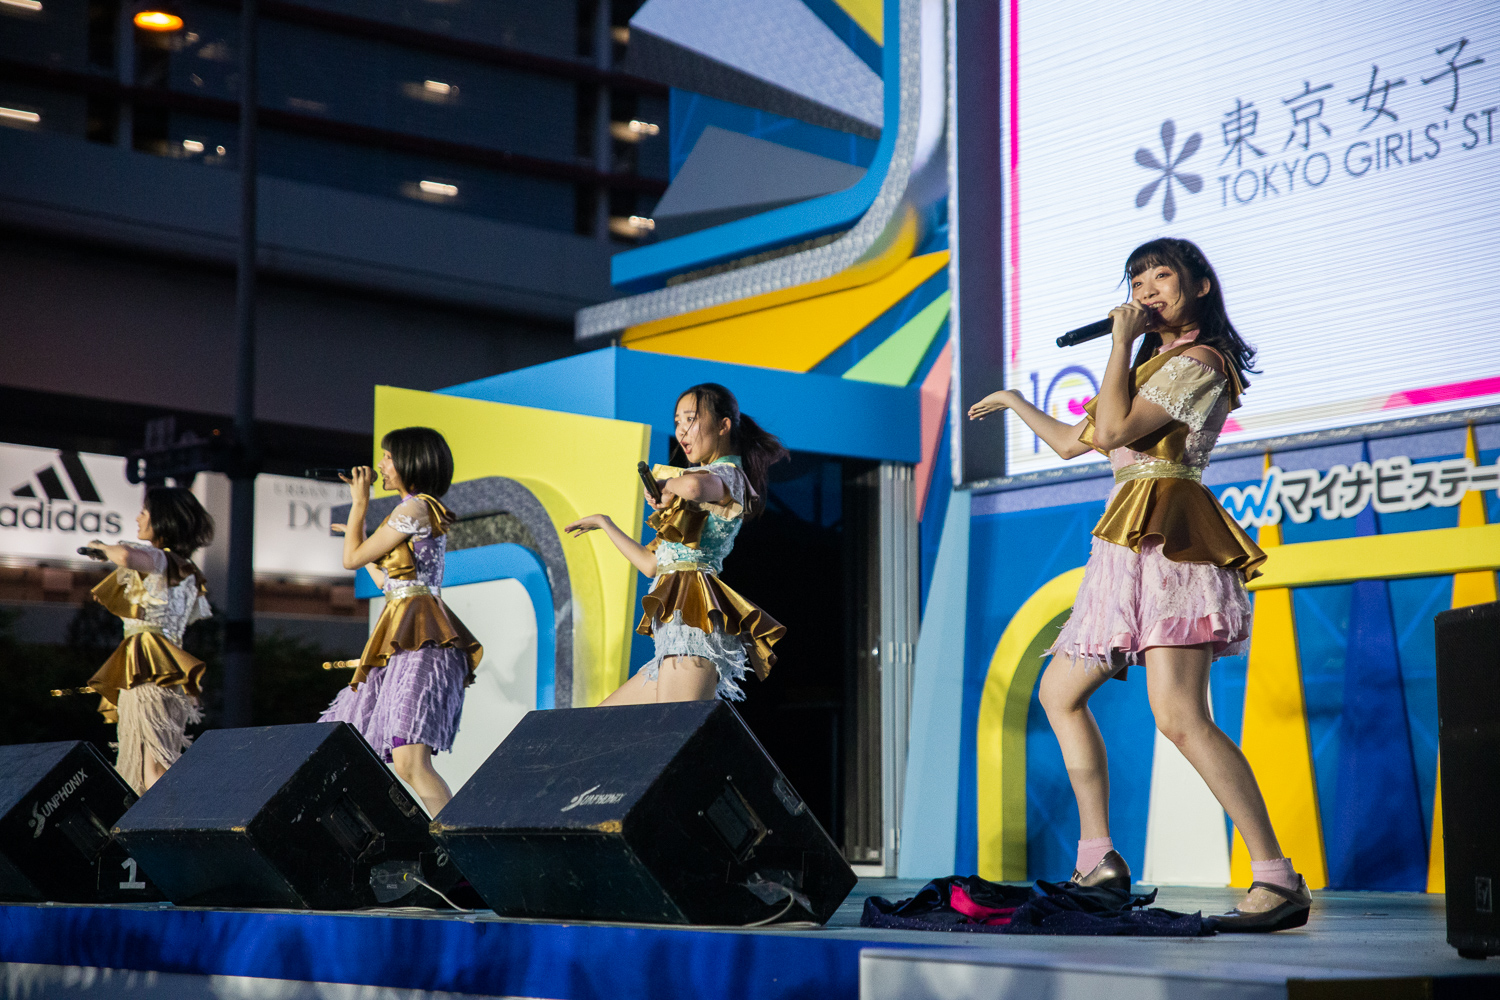 TIF 2019: TOKYO GIRLS’ STYLE Shines on Stage With a Veteran-worthy Performance